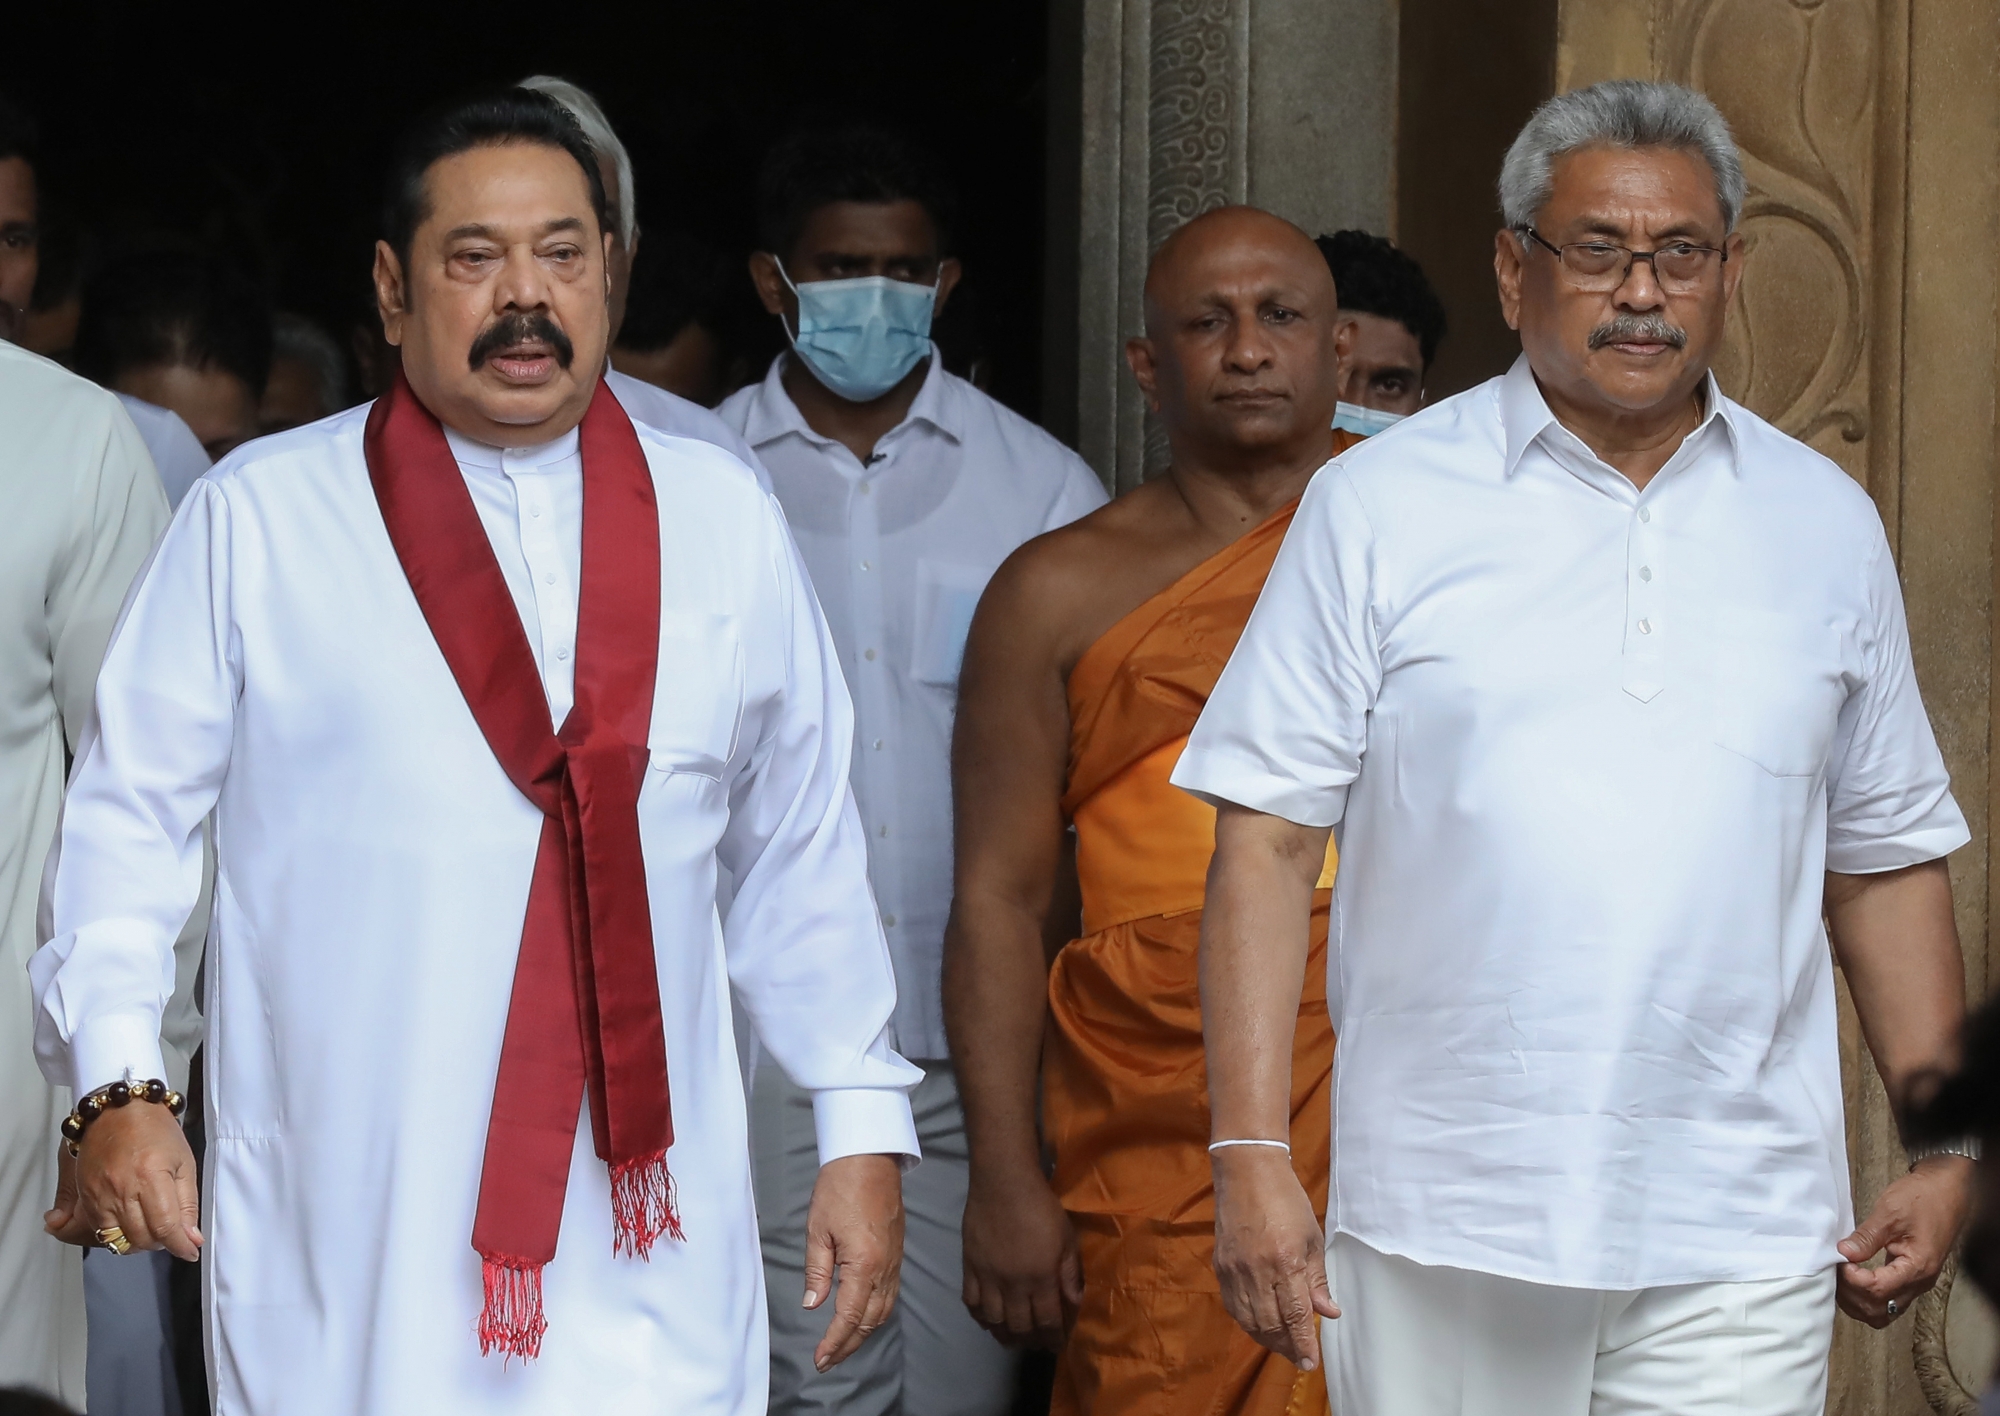 epa08592836 Sri Lanka's newly elected Prime Minister Mahinda Rajapaksa (L), his younger brother Sri Lankan President Gotabaya Rajapaksa (R) leave after the swearing-in ceremony at sacred Kelaniya Buddhist Temple in Colombo, Sri Lanka, 09 August 2020. Mahinda Rajapaksa, the two times executive President of Sri Lanka and three times Prime Minister, was sworn in as the Prime Minister of Sri Lanka for the fourth time. He was elected with a recorded number of preferential votes over 500,000 from Kurunegla district on 05 August parliamentary elections.  EPA/CHAMILA KARUNARATHNE ArcInfo